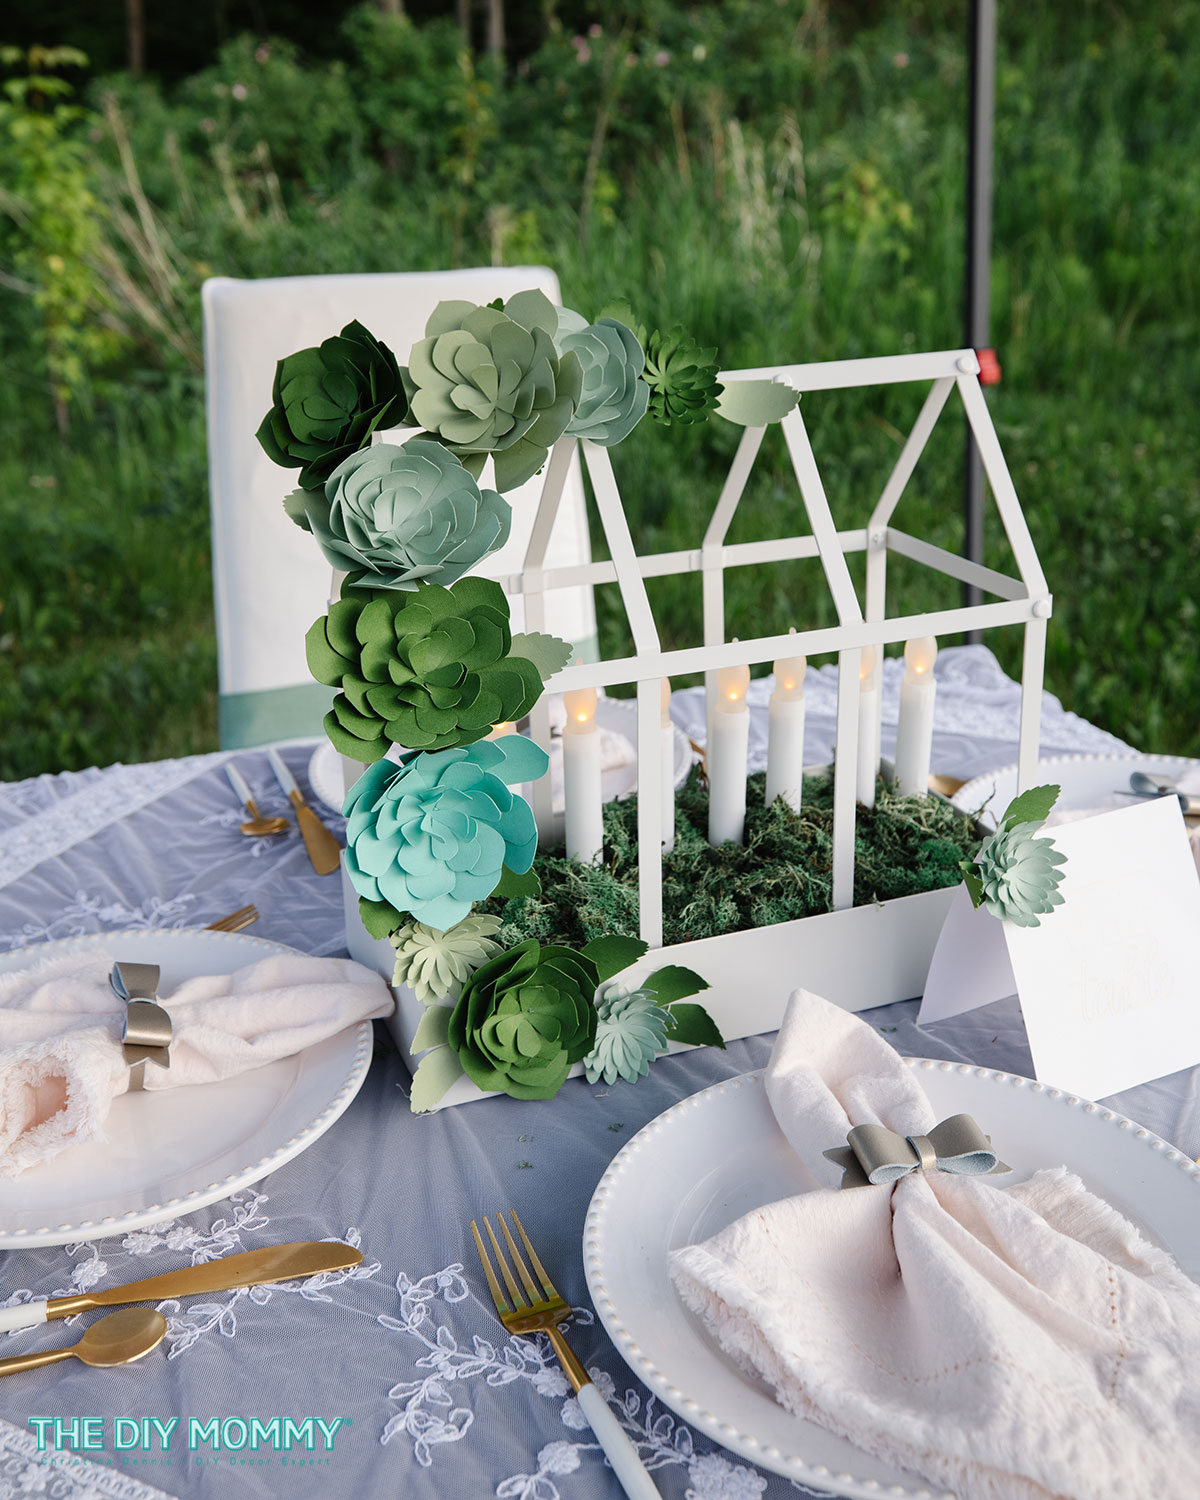 Outdoor wedding decorations on a budget